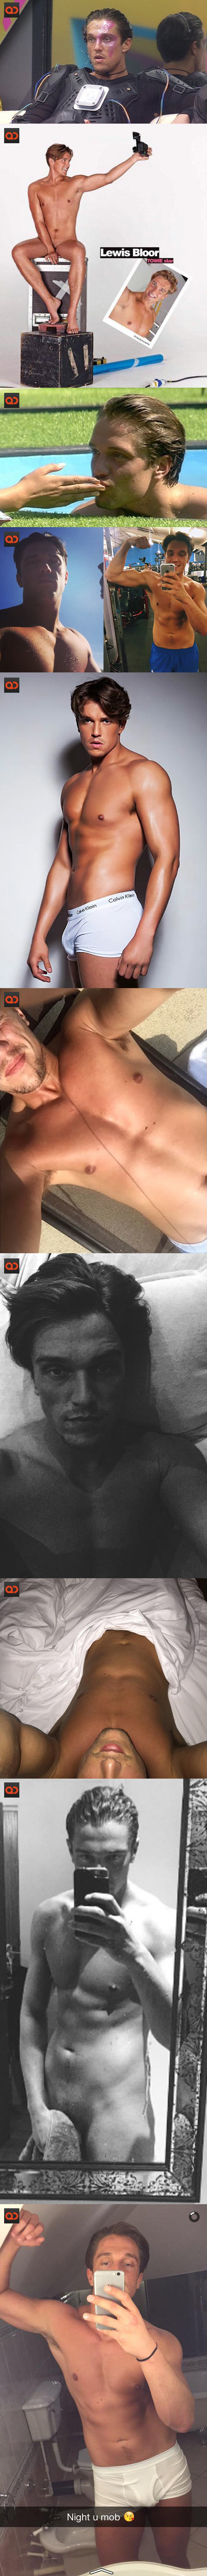 Lewis Bloor Can't Keep His Cock In His Pants - The Former Celebrity Big Brother Star Snapchatted His Big Dong!